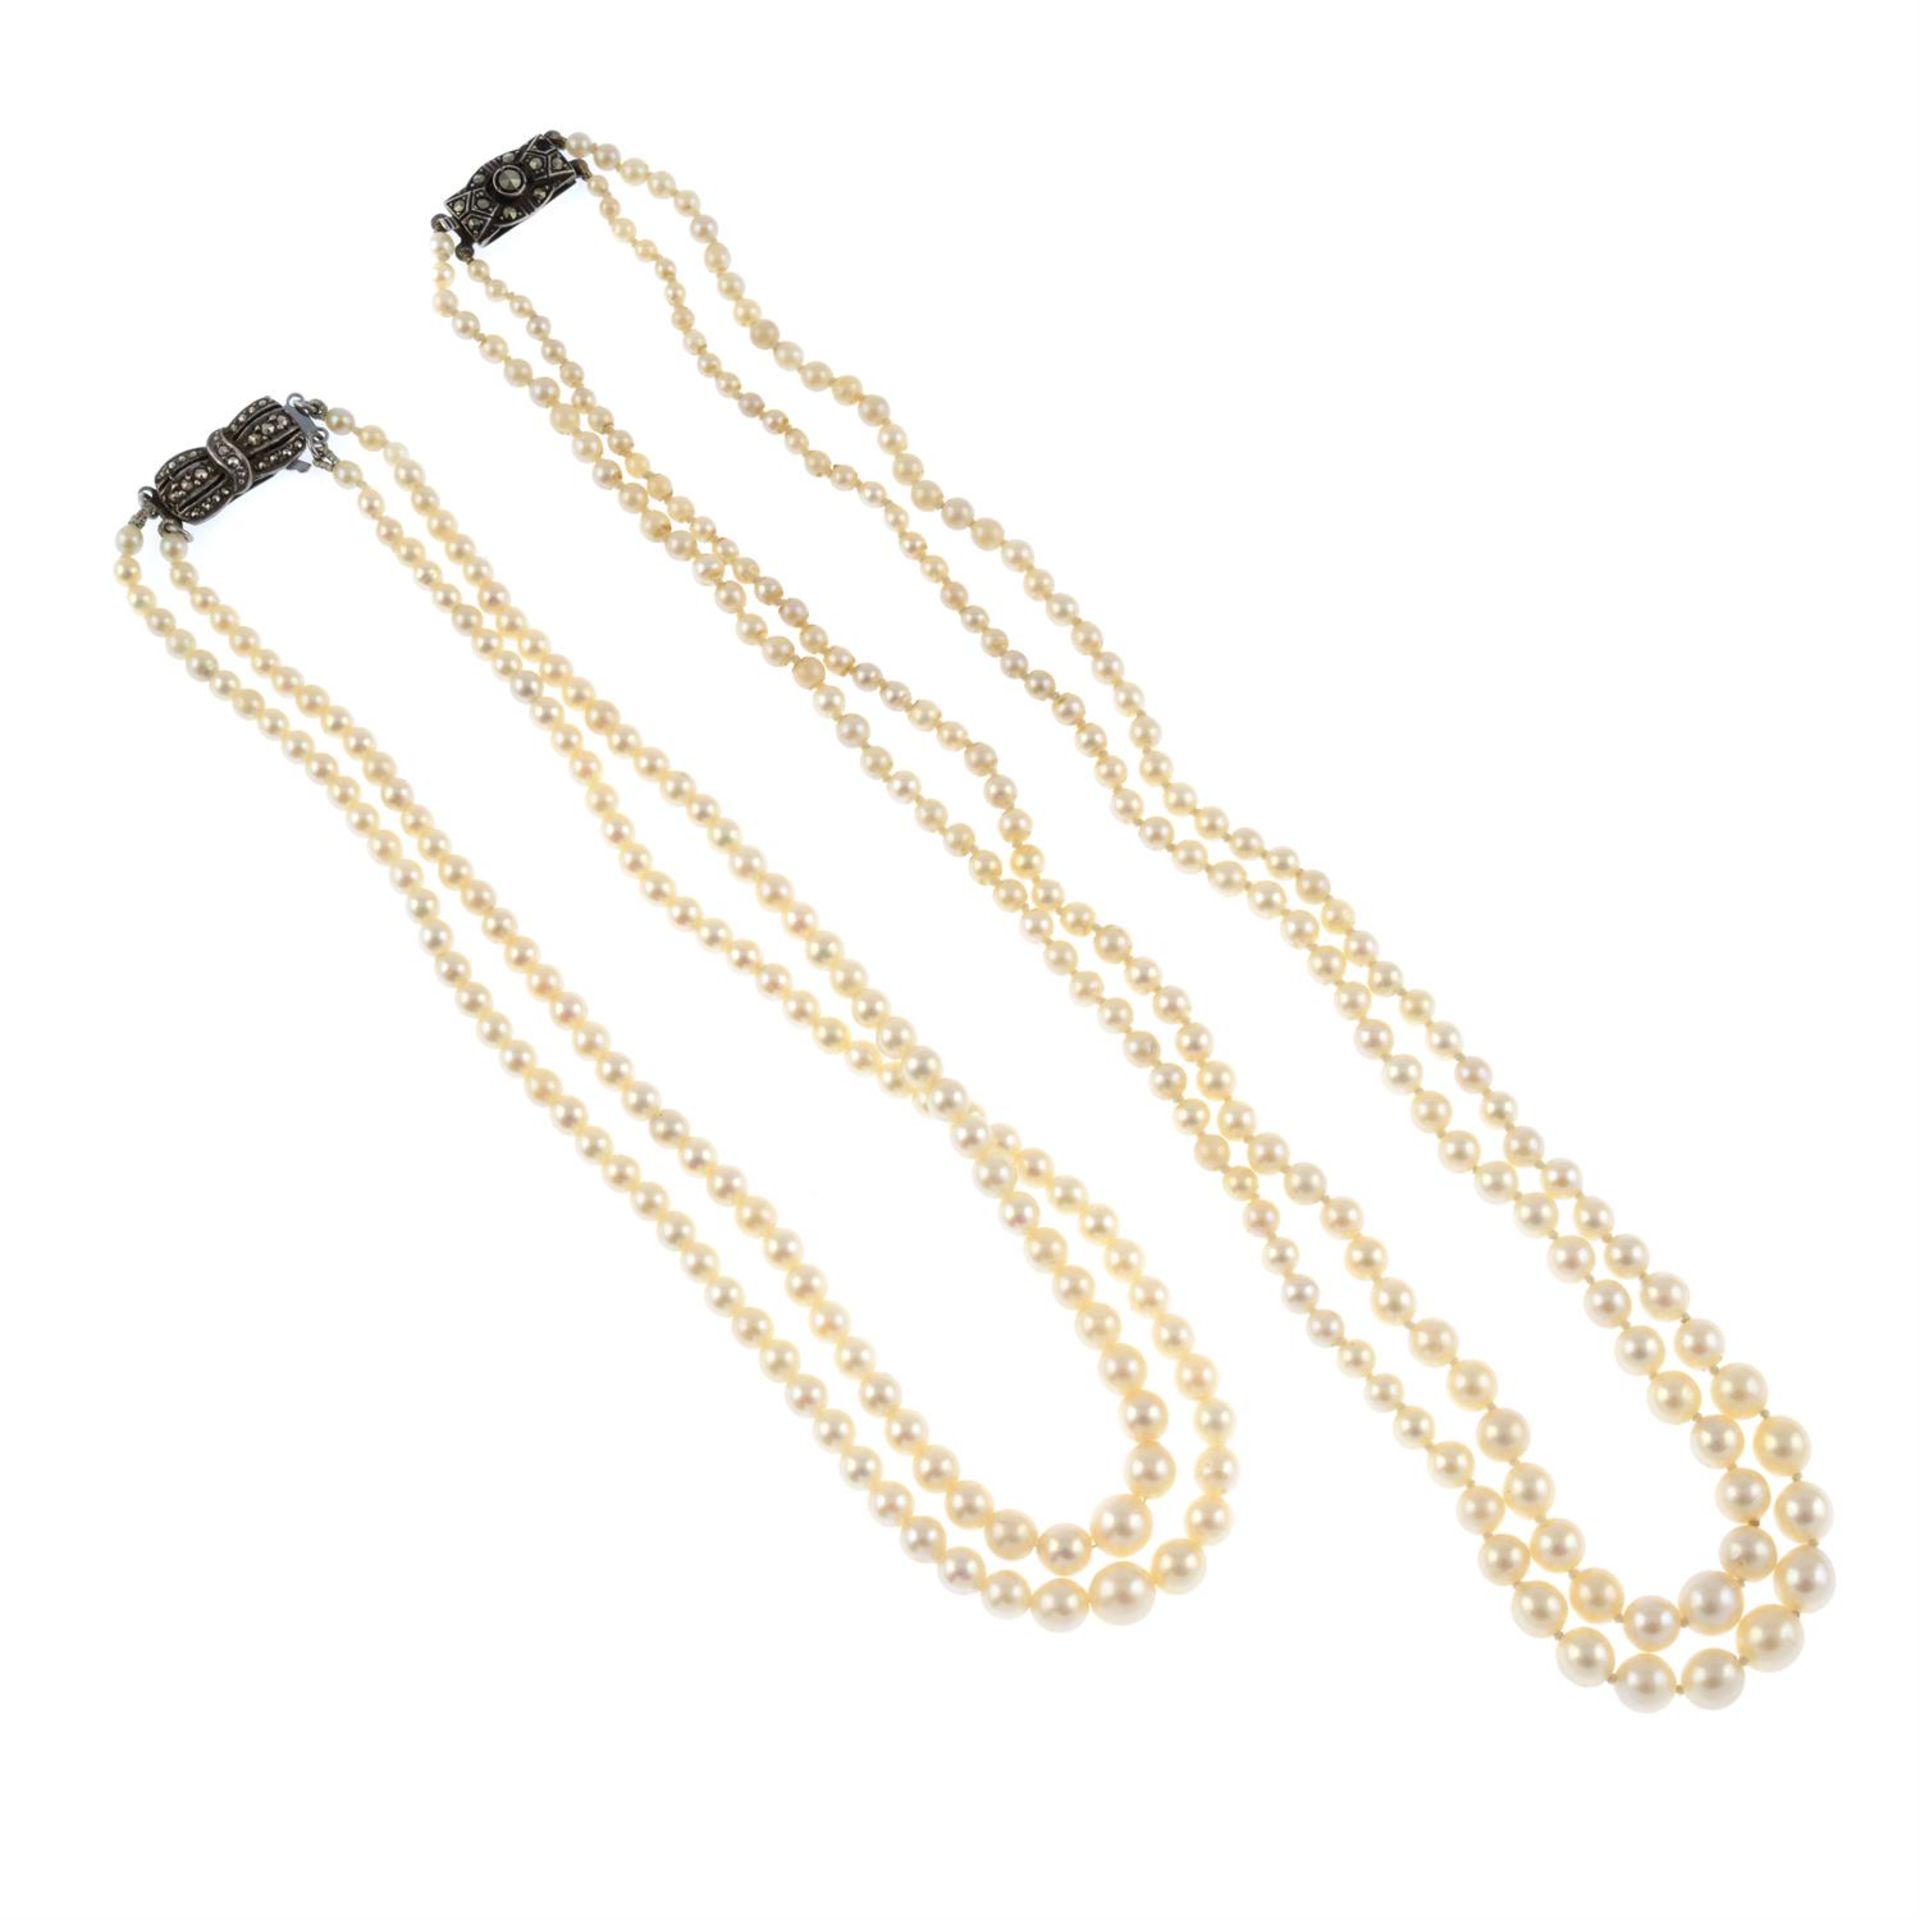 Two cultured pearls necklaces